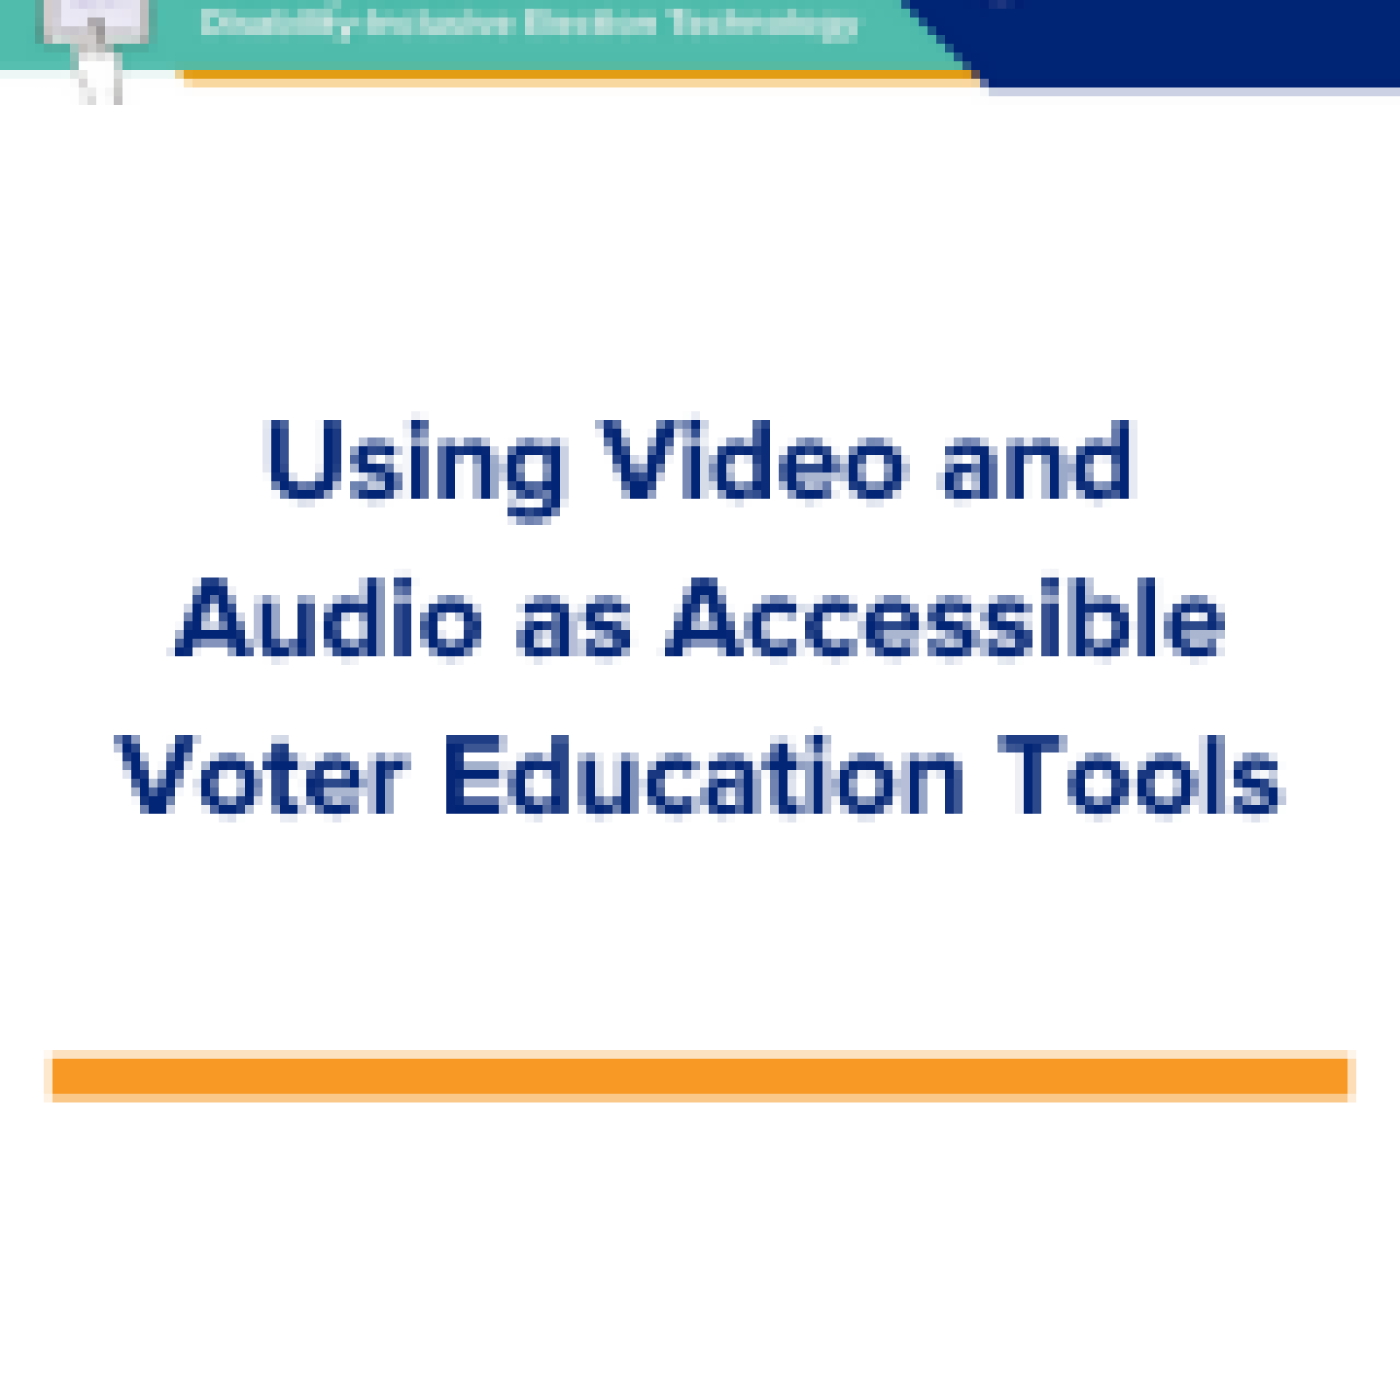 Using Video and Audio as Accessible Voter Education Tools